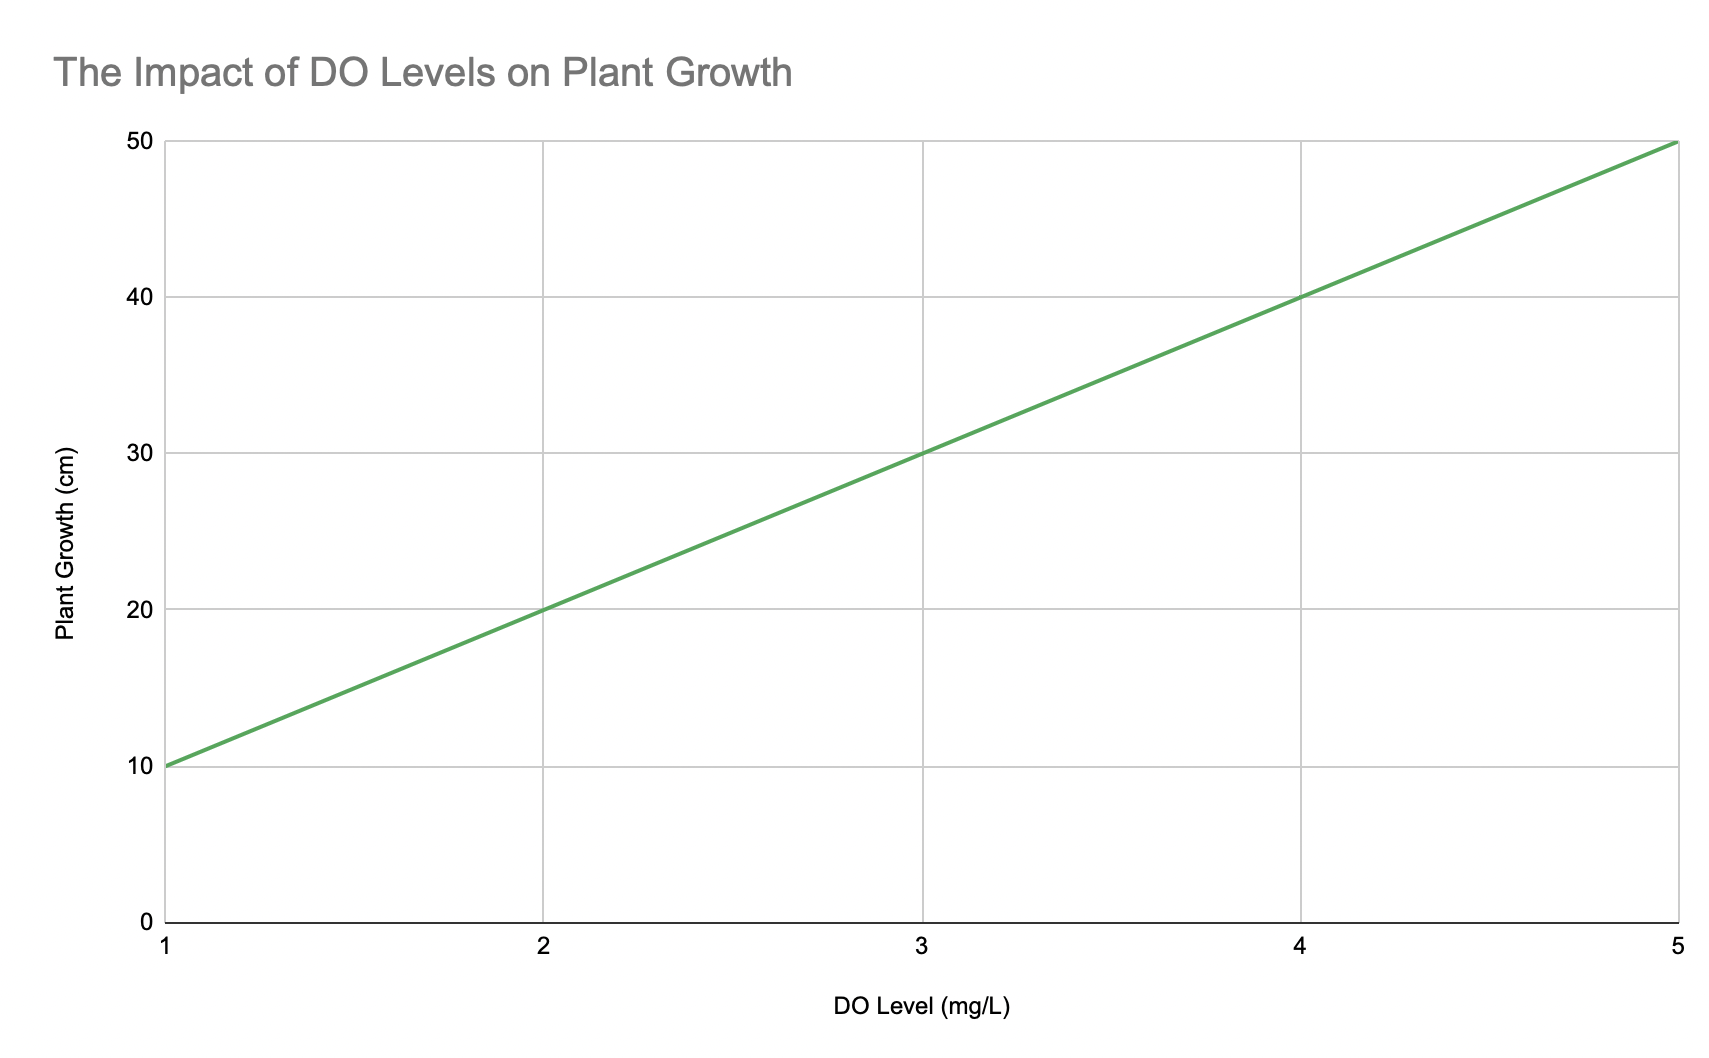 This graph shows the relationship between dissolved oxygen (DO) levels and plant growth. The x-axis shows DO levels in milligrams per liter (mg/L), and the y-axis shows plant growth in centimeters. As the DO level increases, the plant growth also increases. The graph shows that there is a positive relationship between DO levels and plant growth.